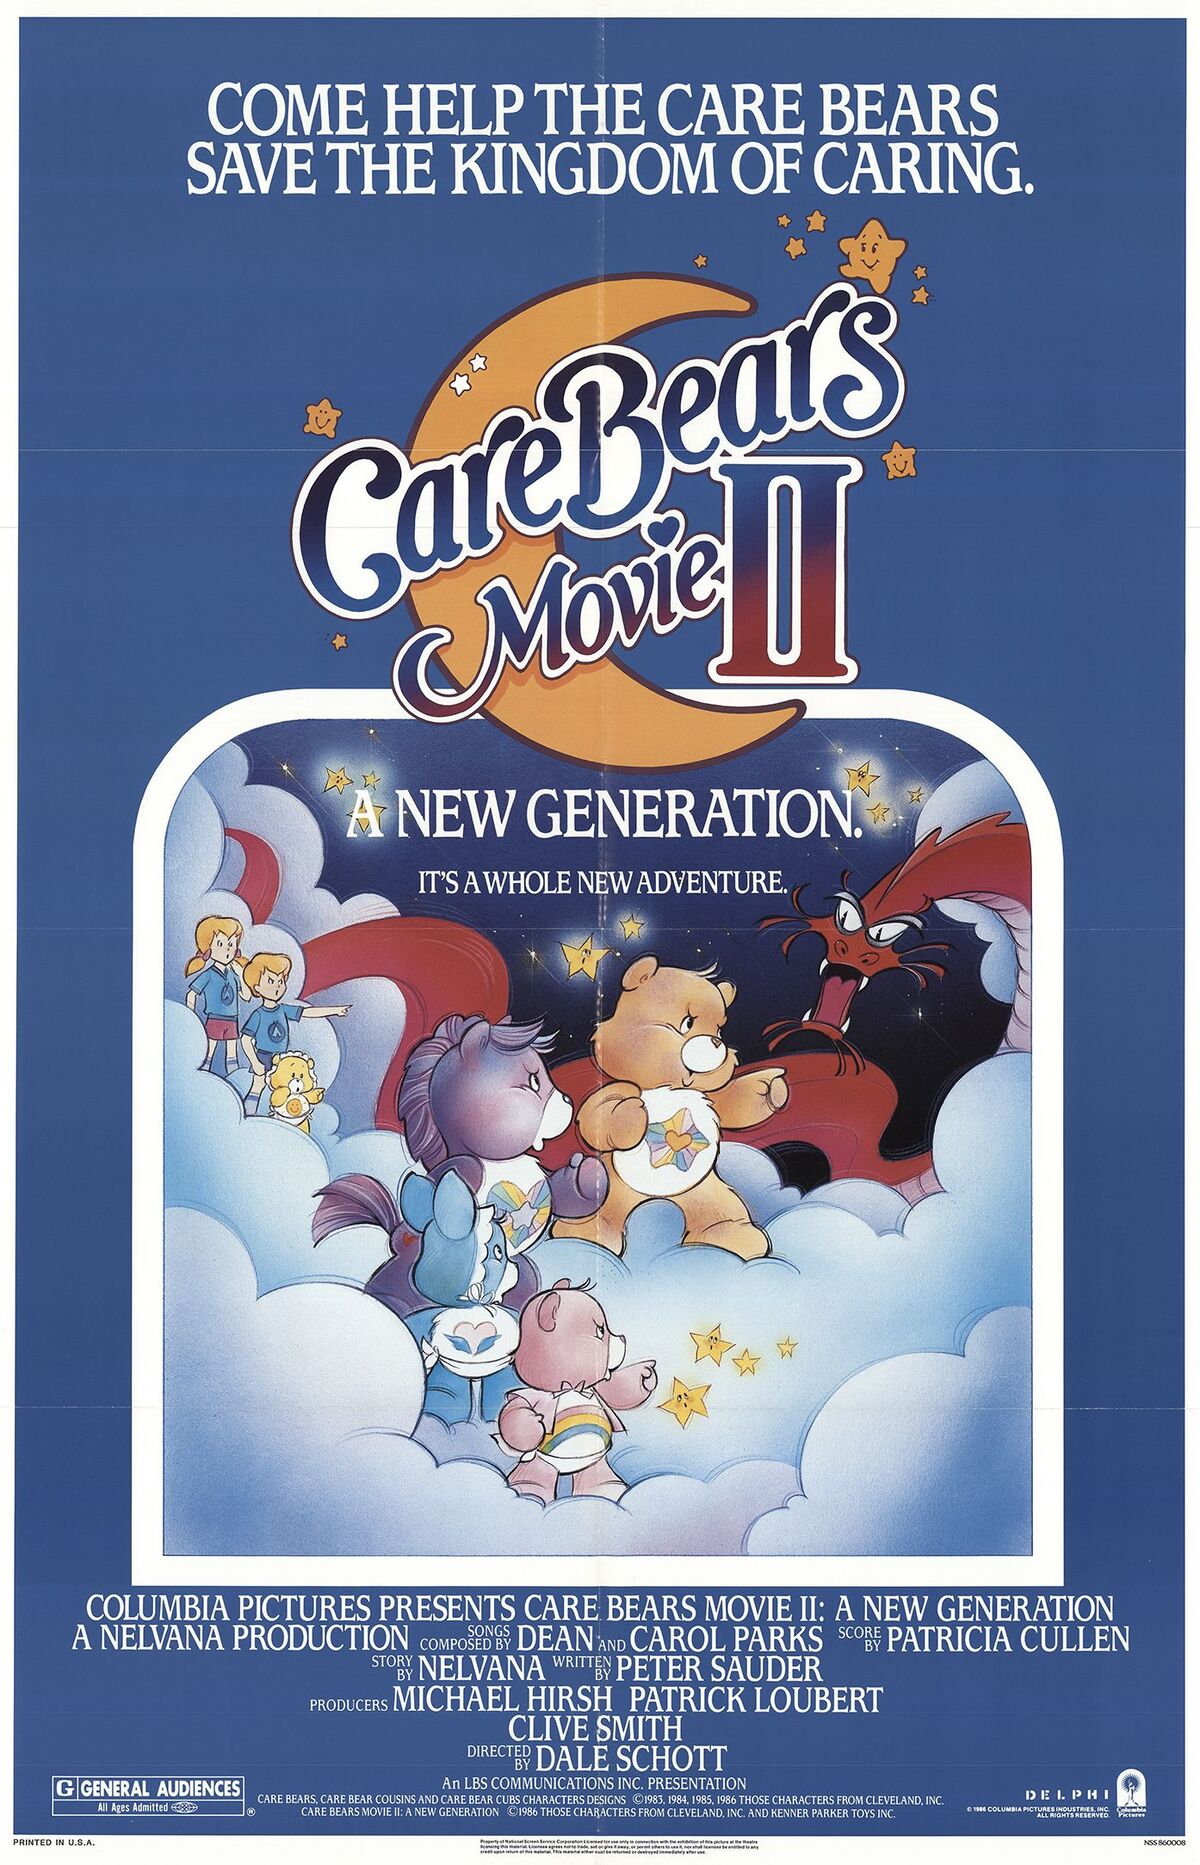 Care Bears' TV show reboot just part of '80s franchise revival